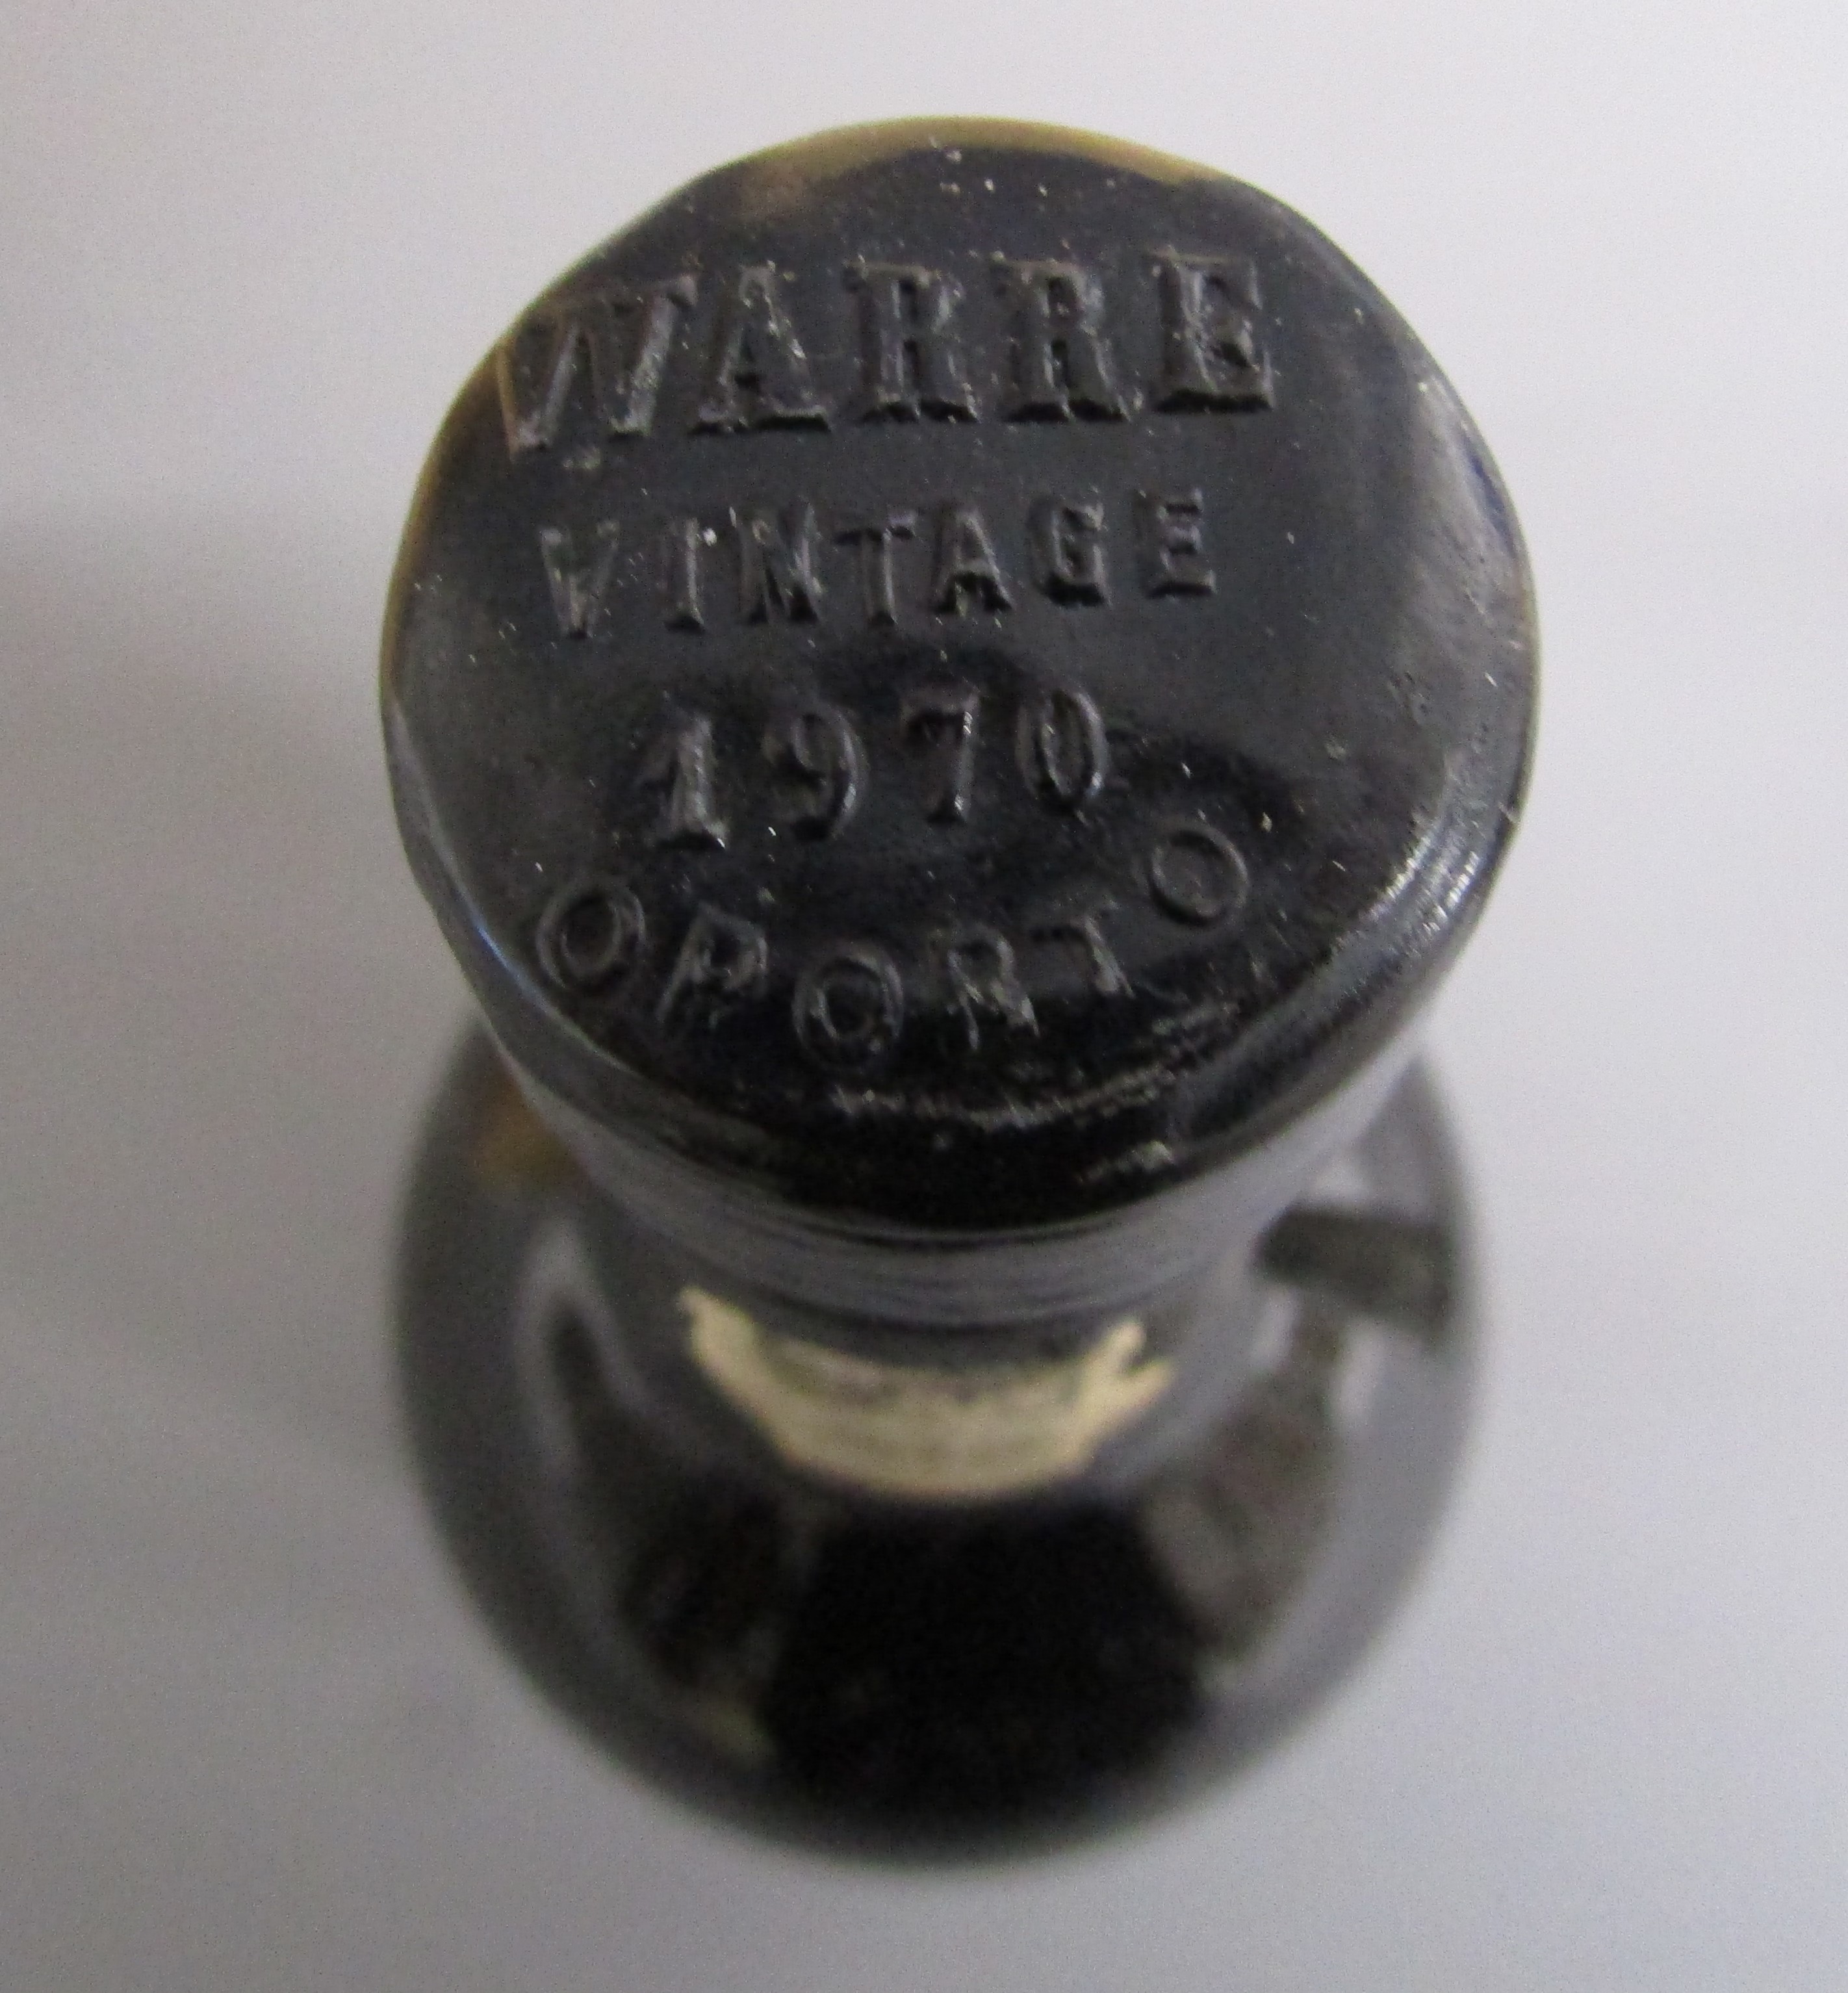 2 bottles of Warre's 1970 Tercentenary vintage Port still with wax seals intact and wooden crate - Image 5 of 6